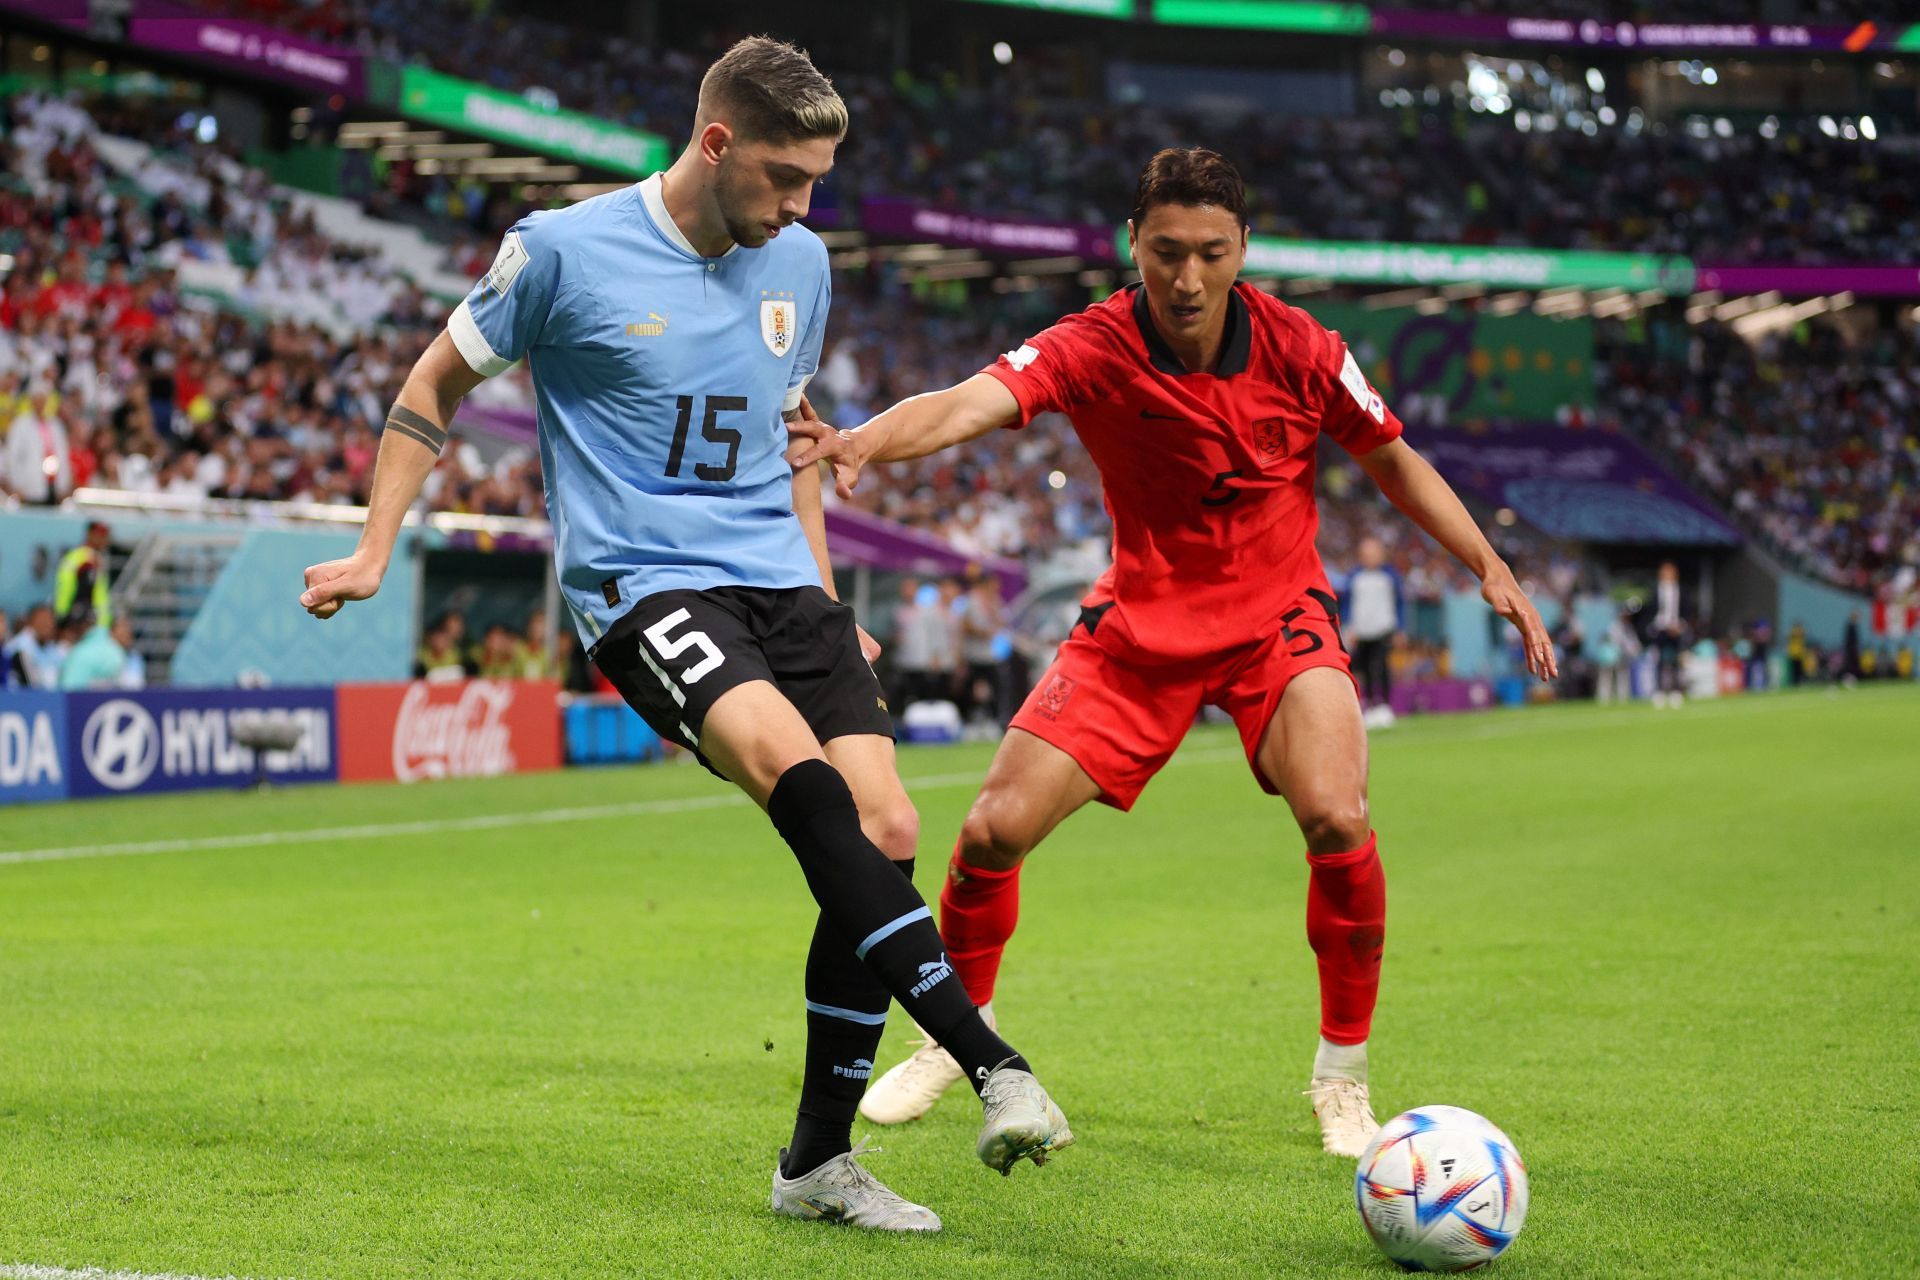 Federico Valverde passes the ball under pressure from Wooyoung Jung.